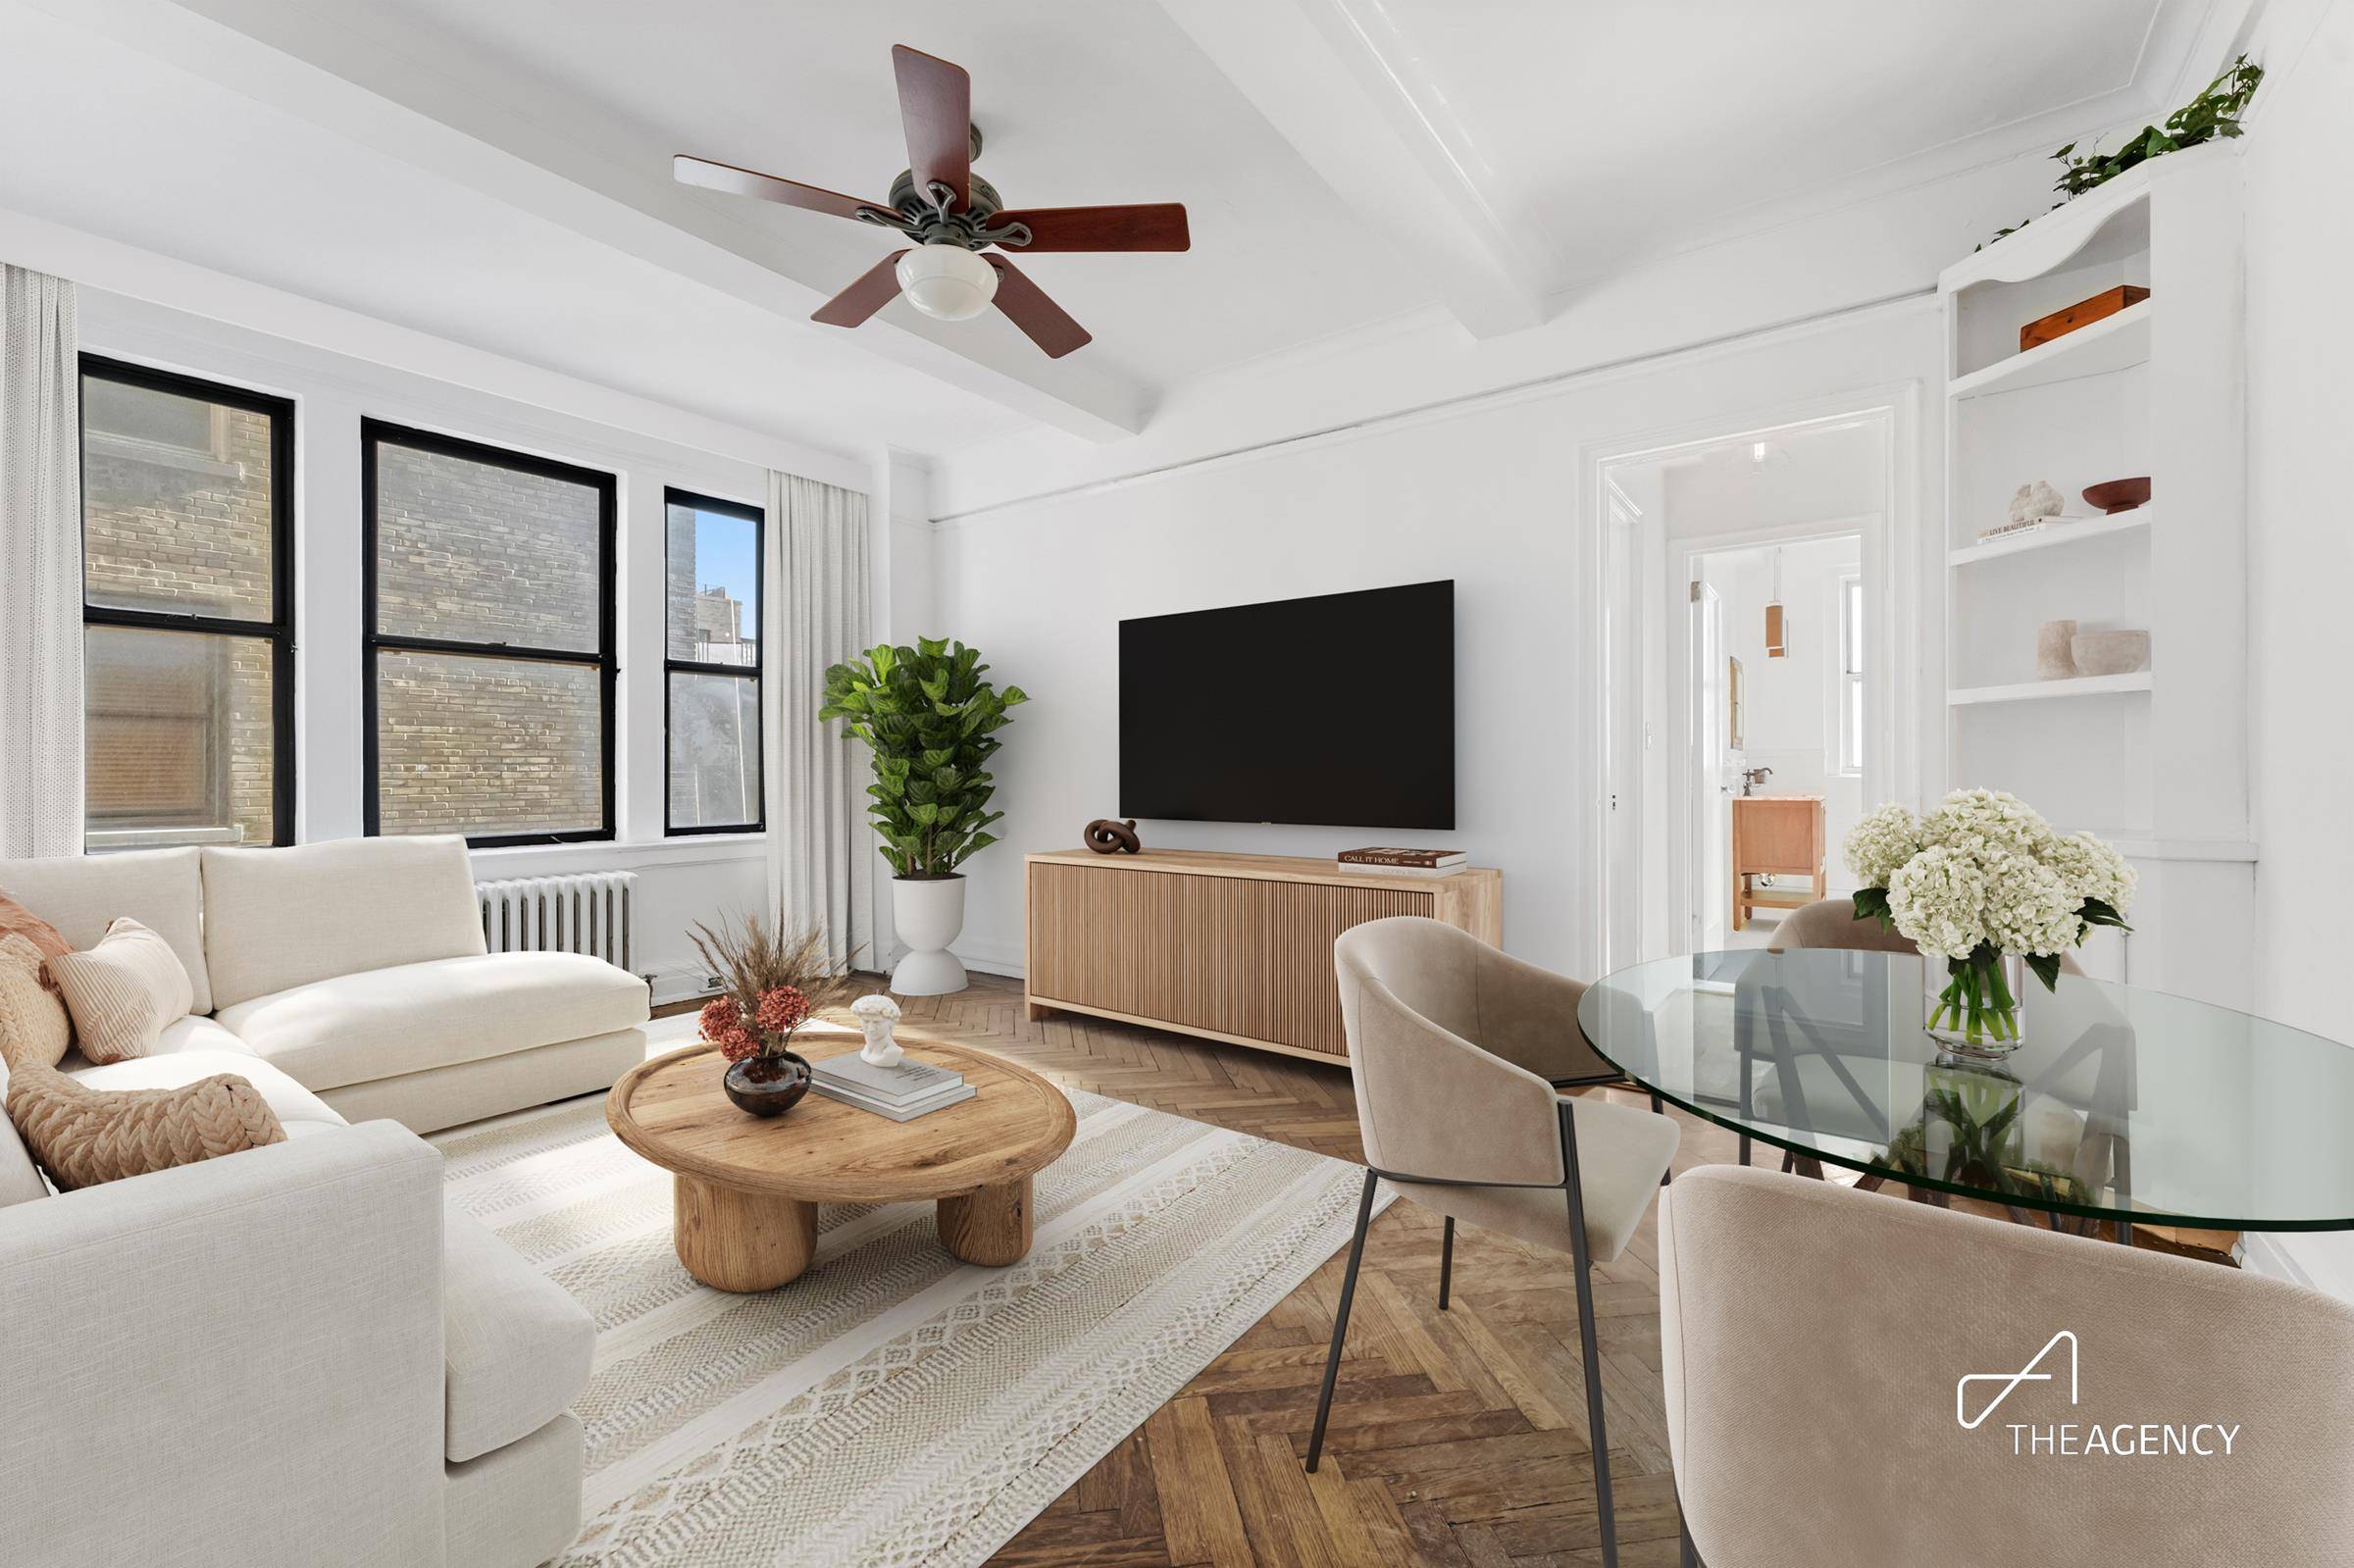 Apartment 8G at The Verdi offers the opportunity to put your personal touch on a spacious and stately residence in one of the best locations on the Upper West Side.